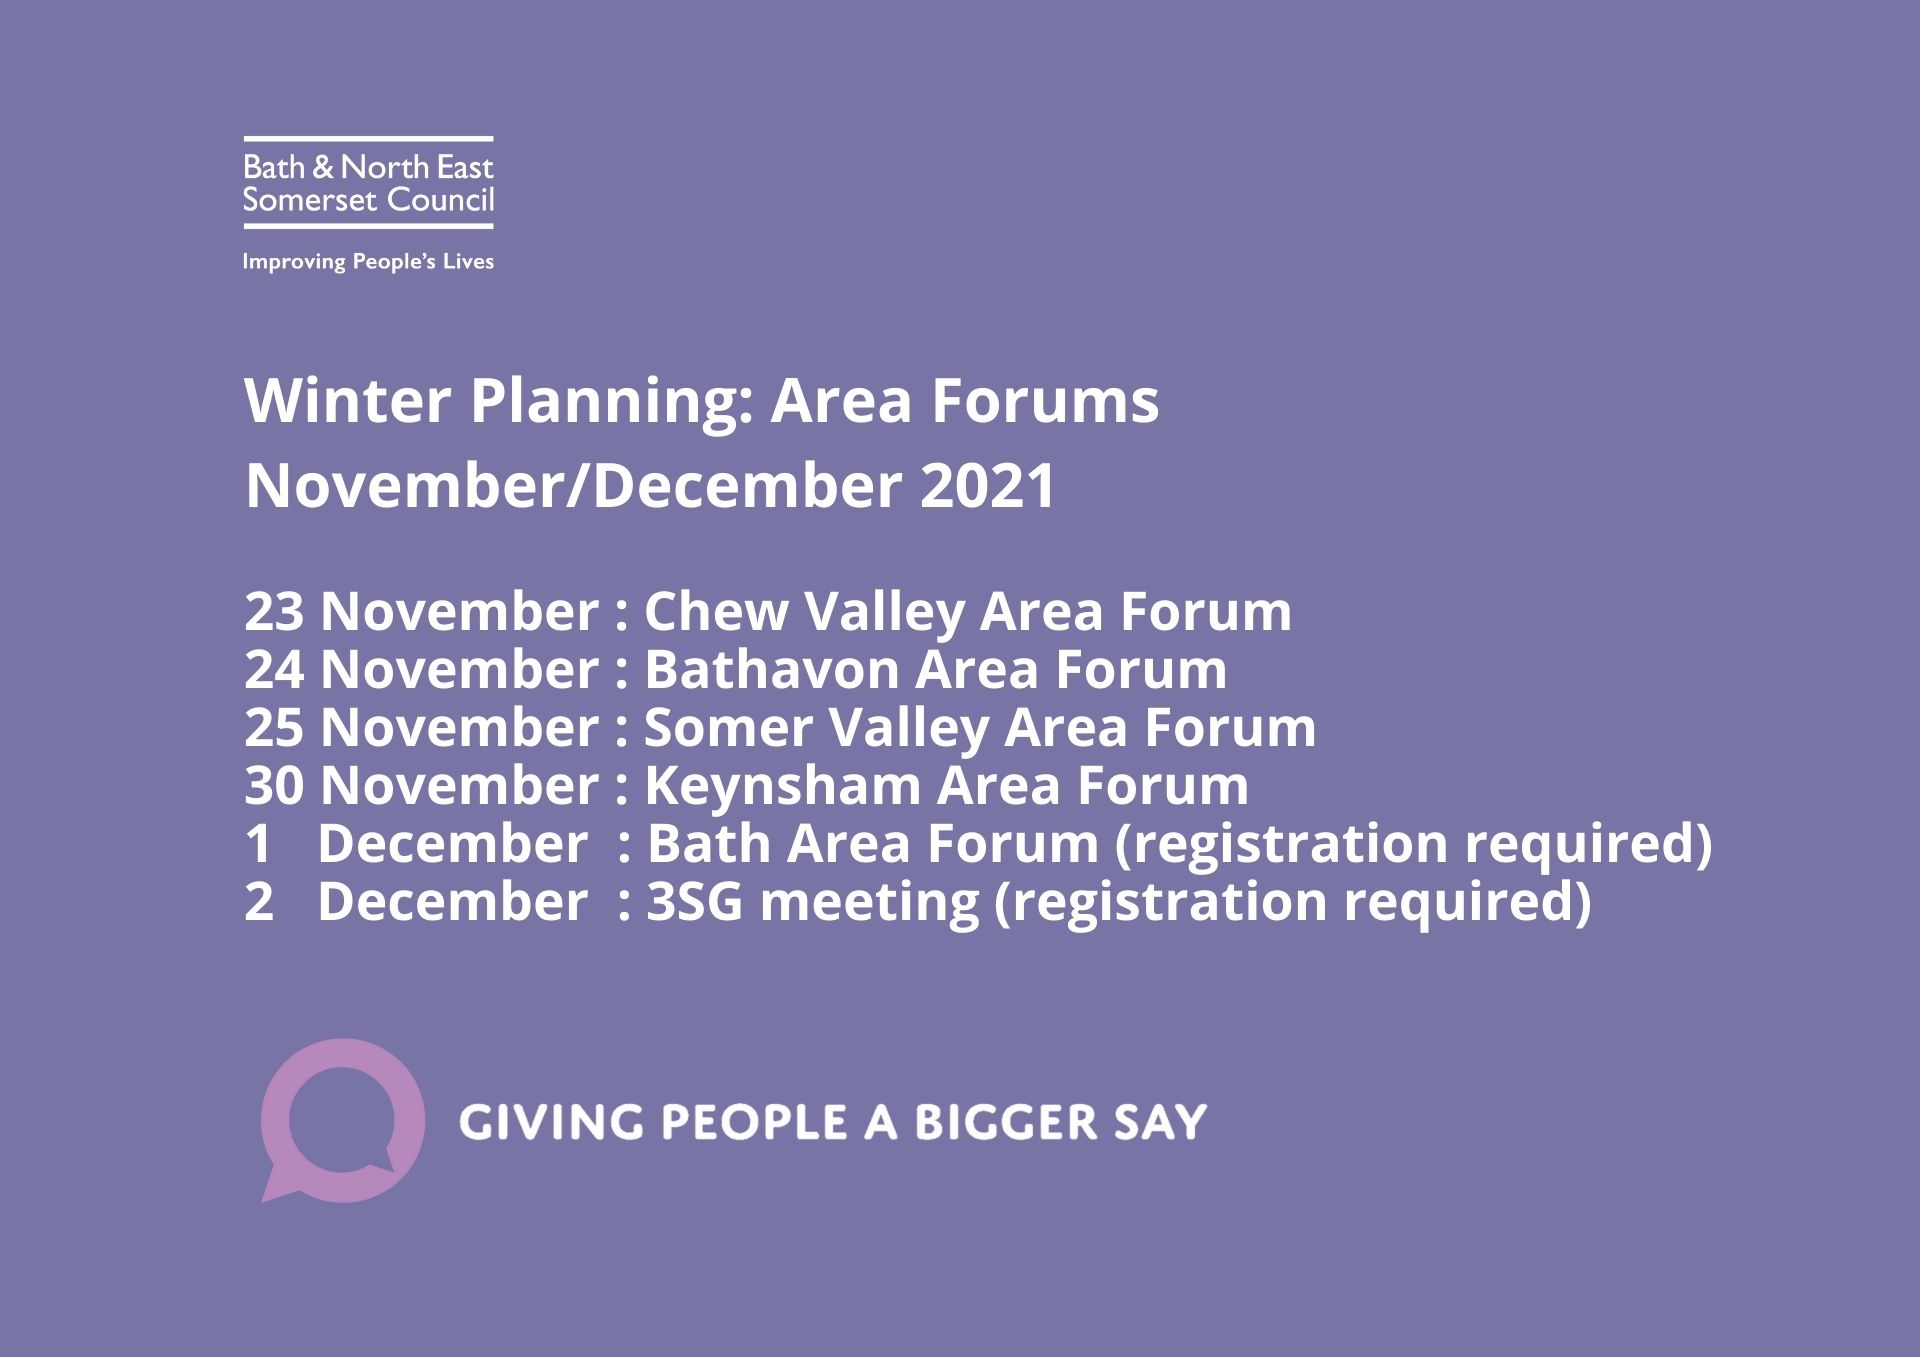 Details of upcoming Winter Planning meetings